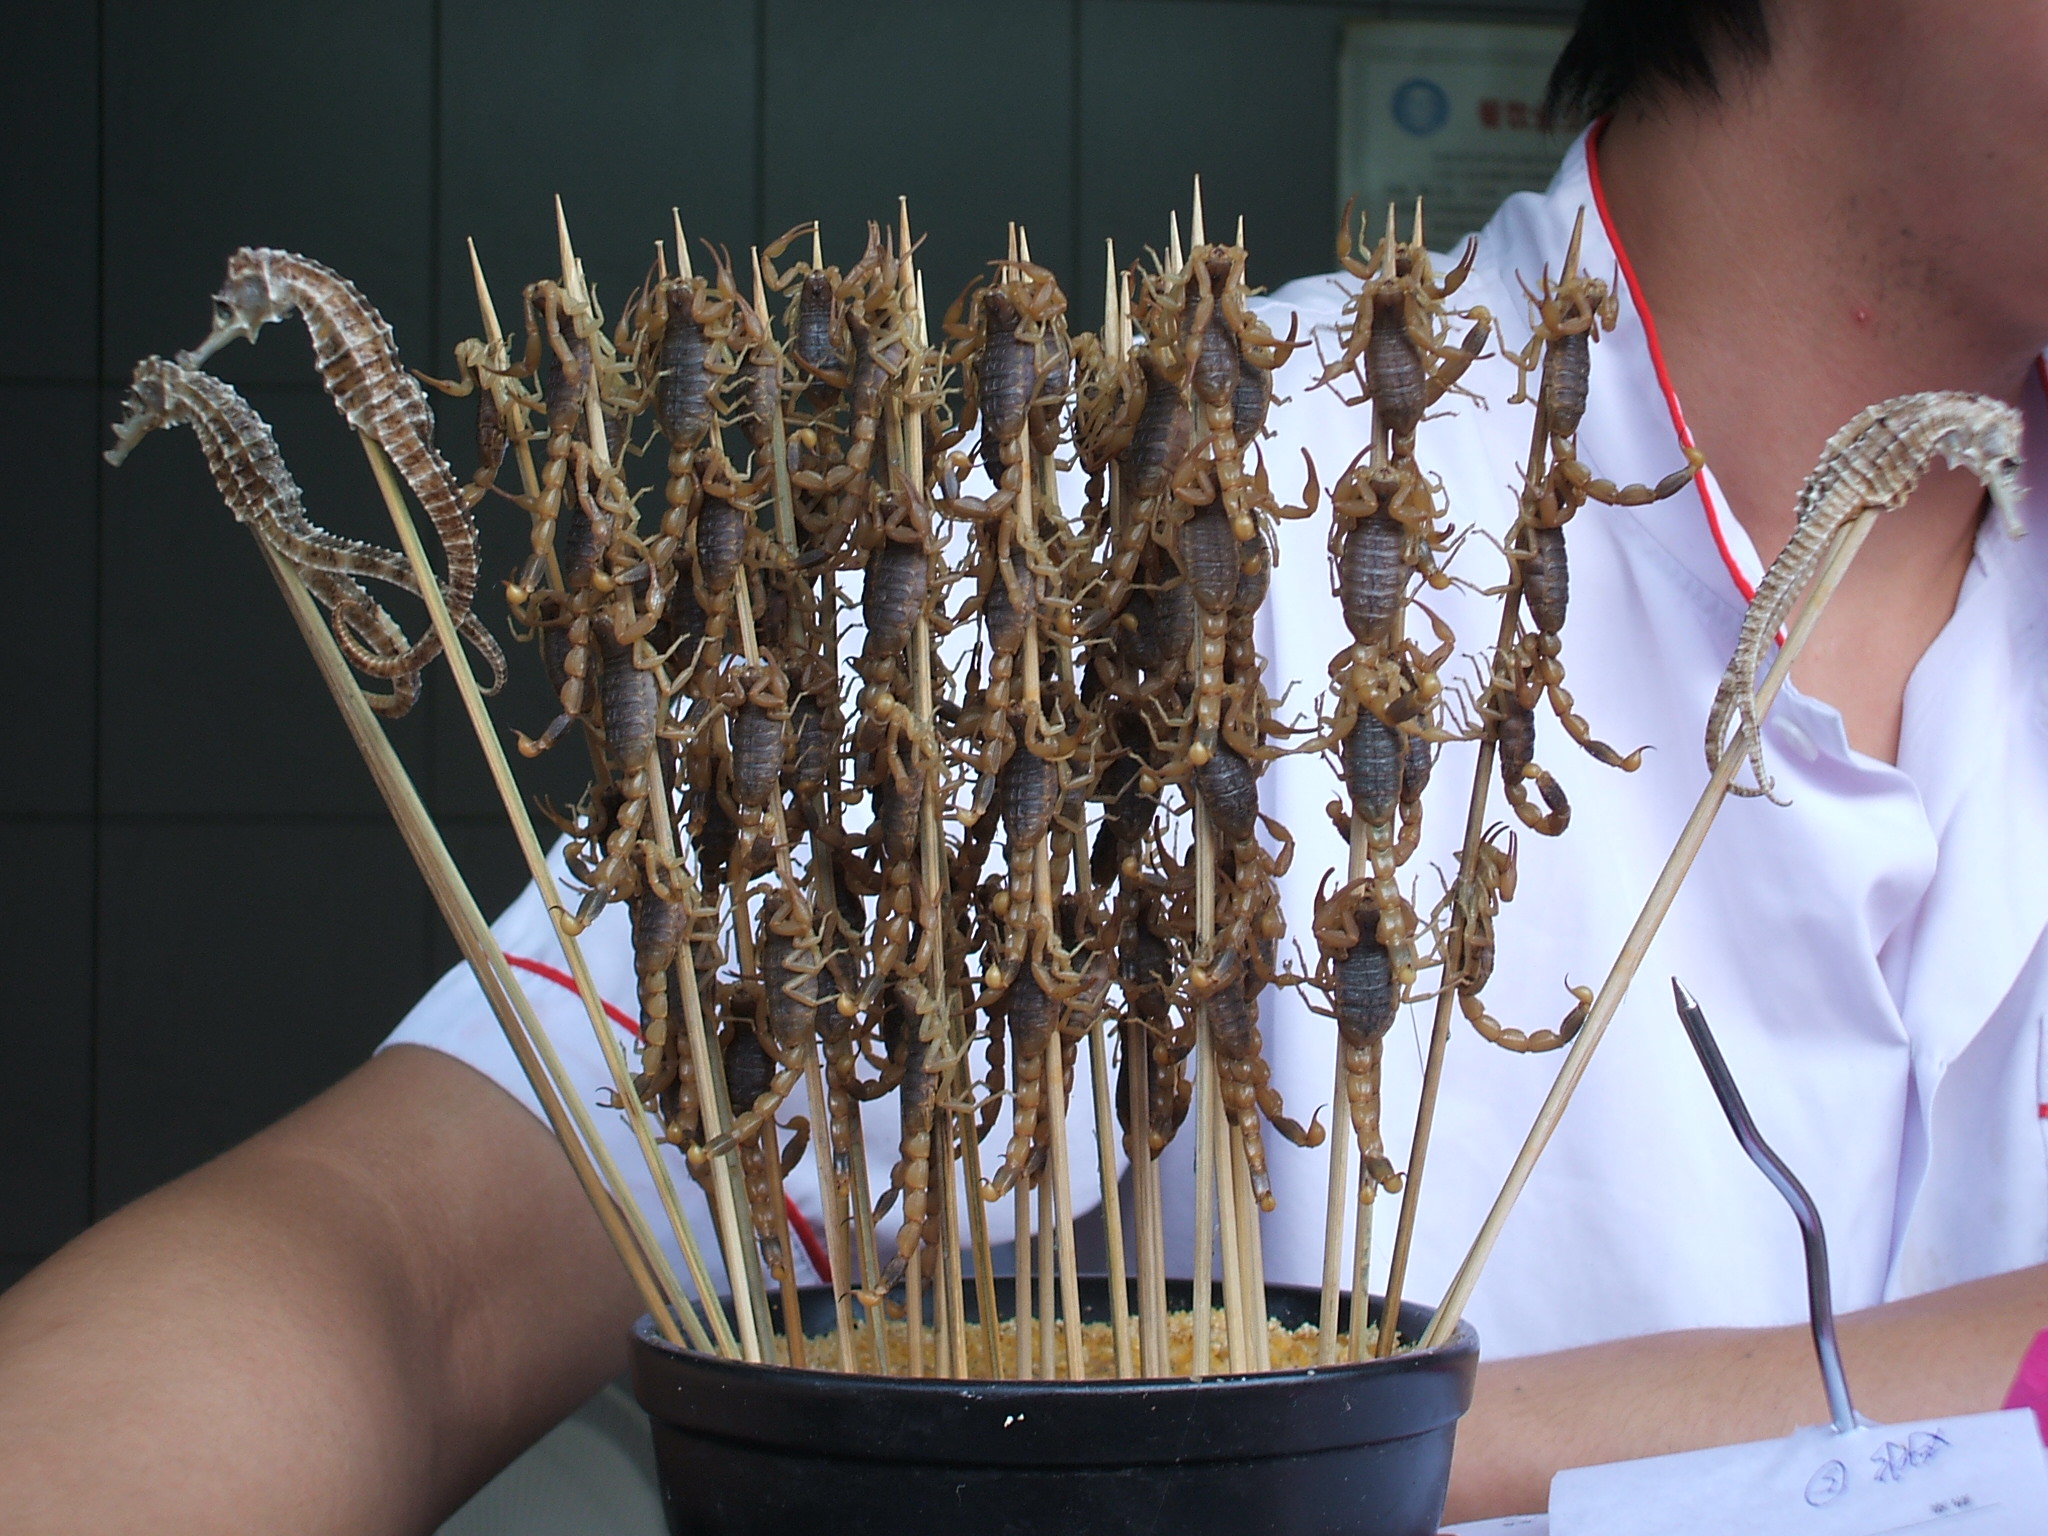 Scorpions and sea horse on skewers.